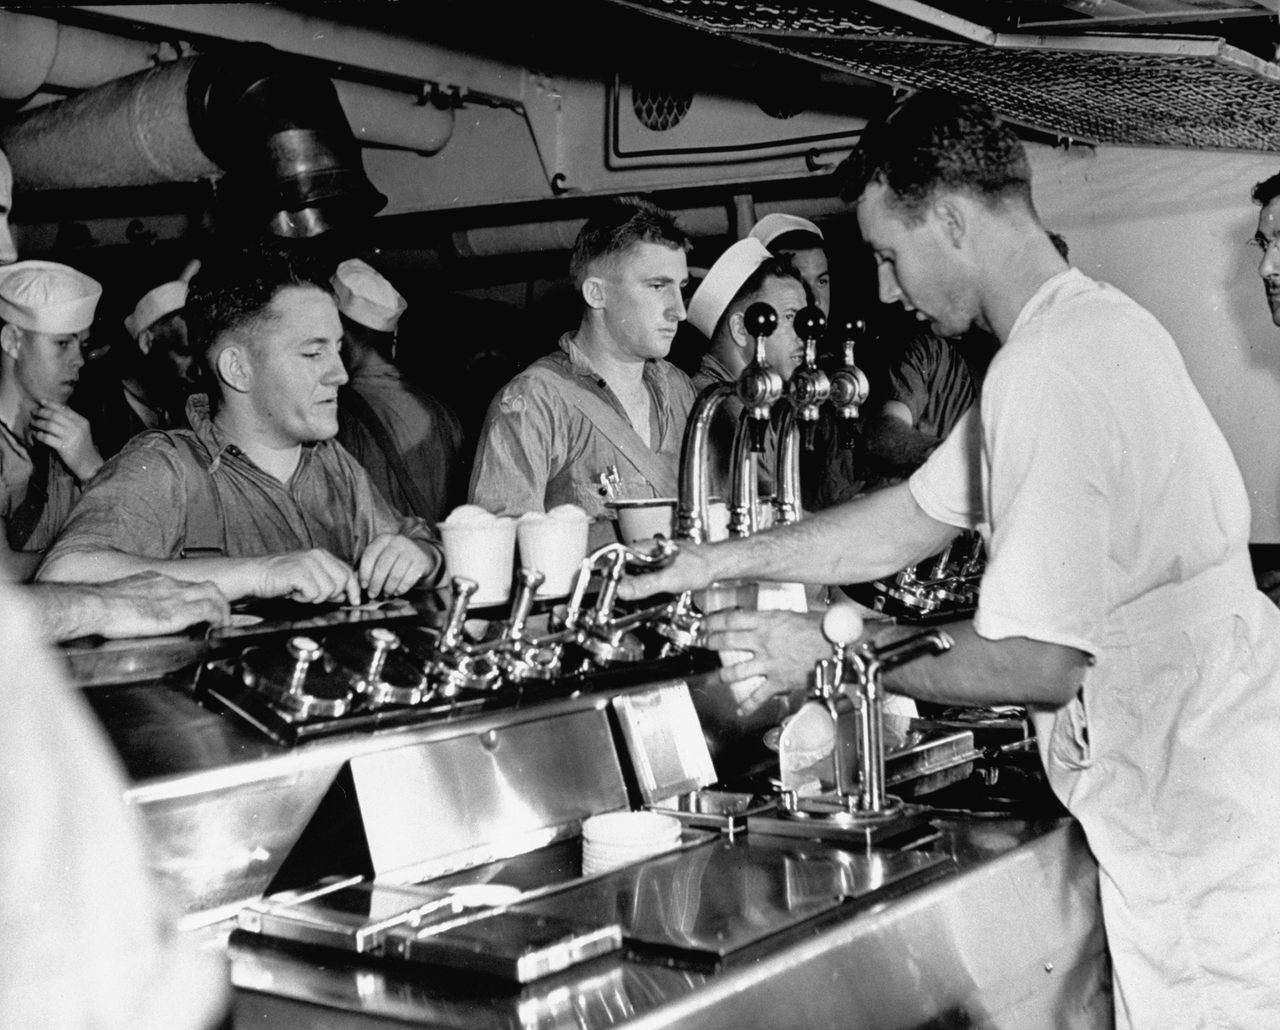 During WWII, sailors aboard a US Navy cruiser at sea flocked to the ice cream fountain.